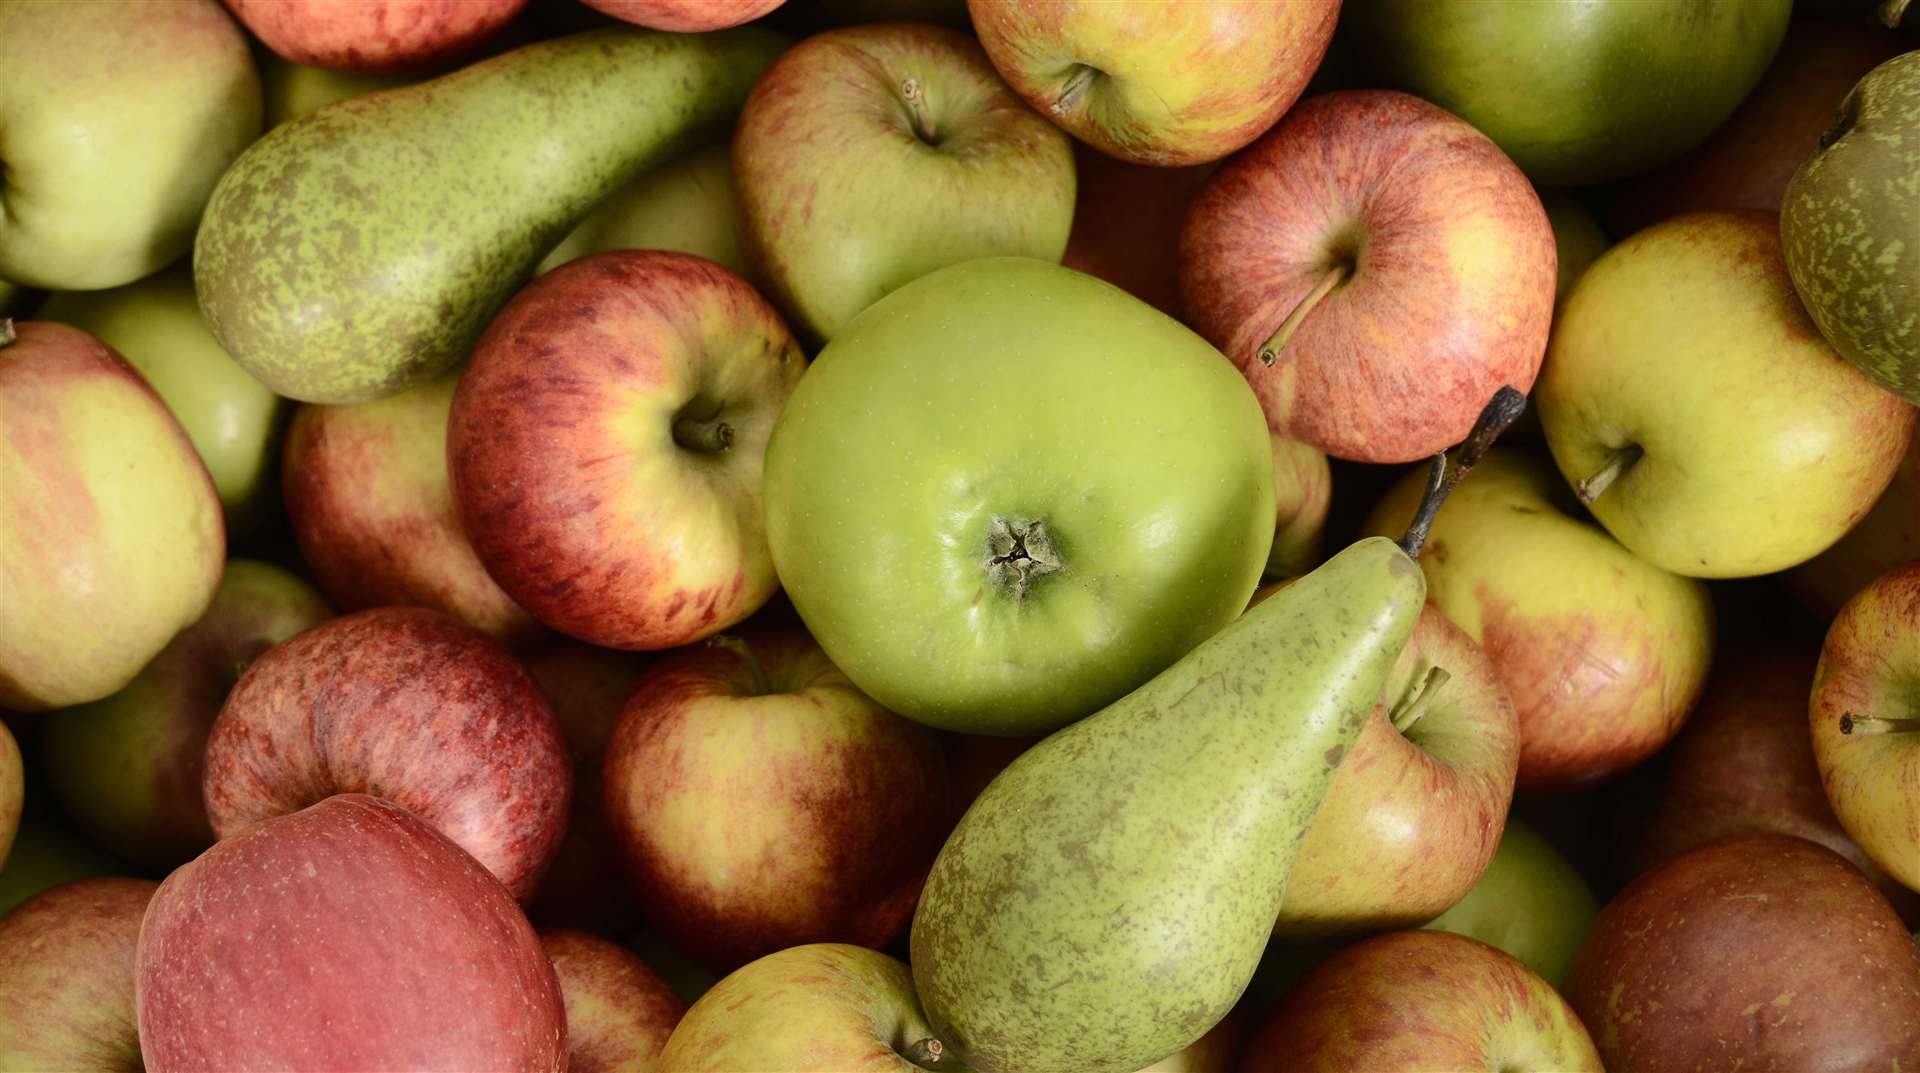 Throughout the year, apples and pears are taken from storage and transported to the packhouse at Hoo.